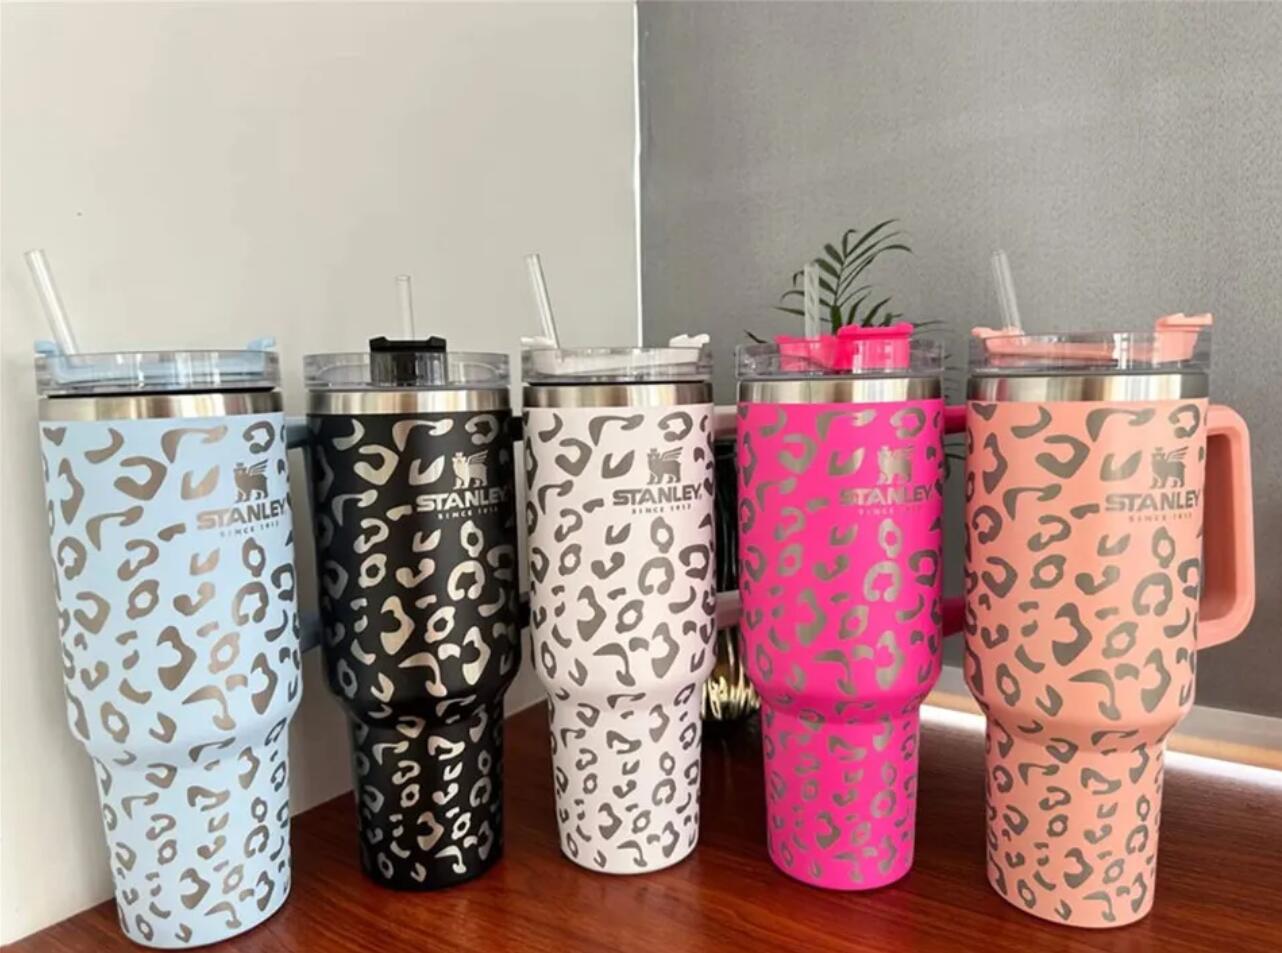 

1PC 40oz stanley LOGO Leopard Stainless Steel Tumblers with Handle Lid Straw Big Capacity Beer Mug Water Bottle Outdoor Camping Vacuum Insulated Drinking GG06469, Multi-color